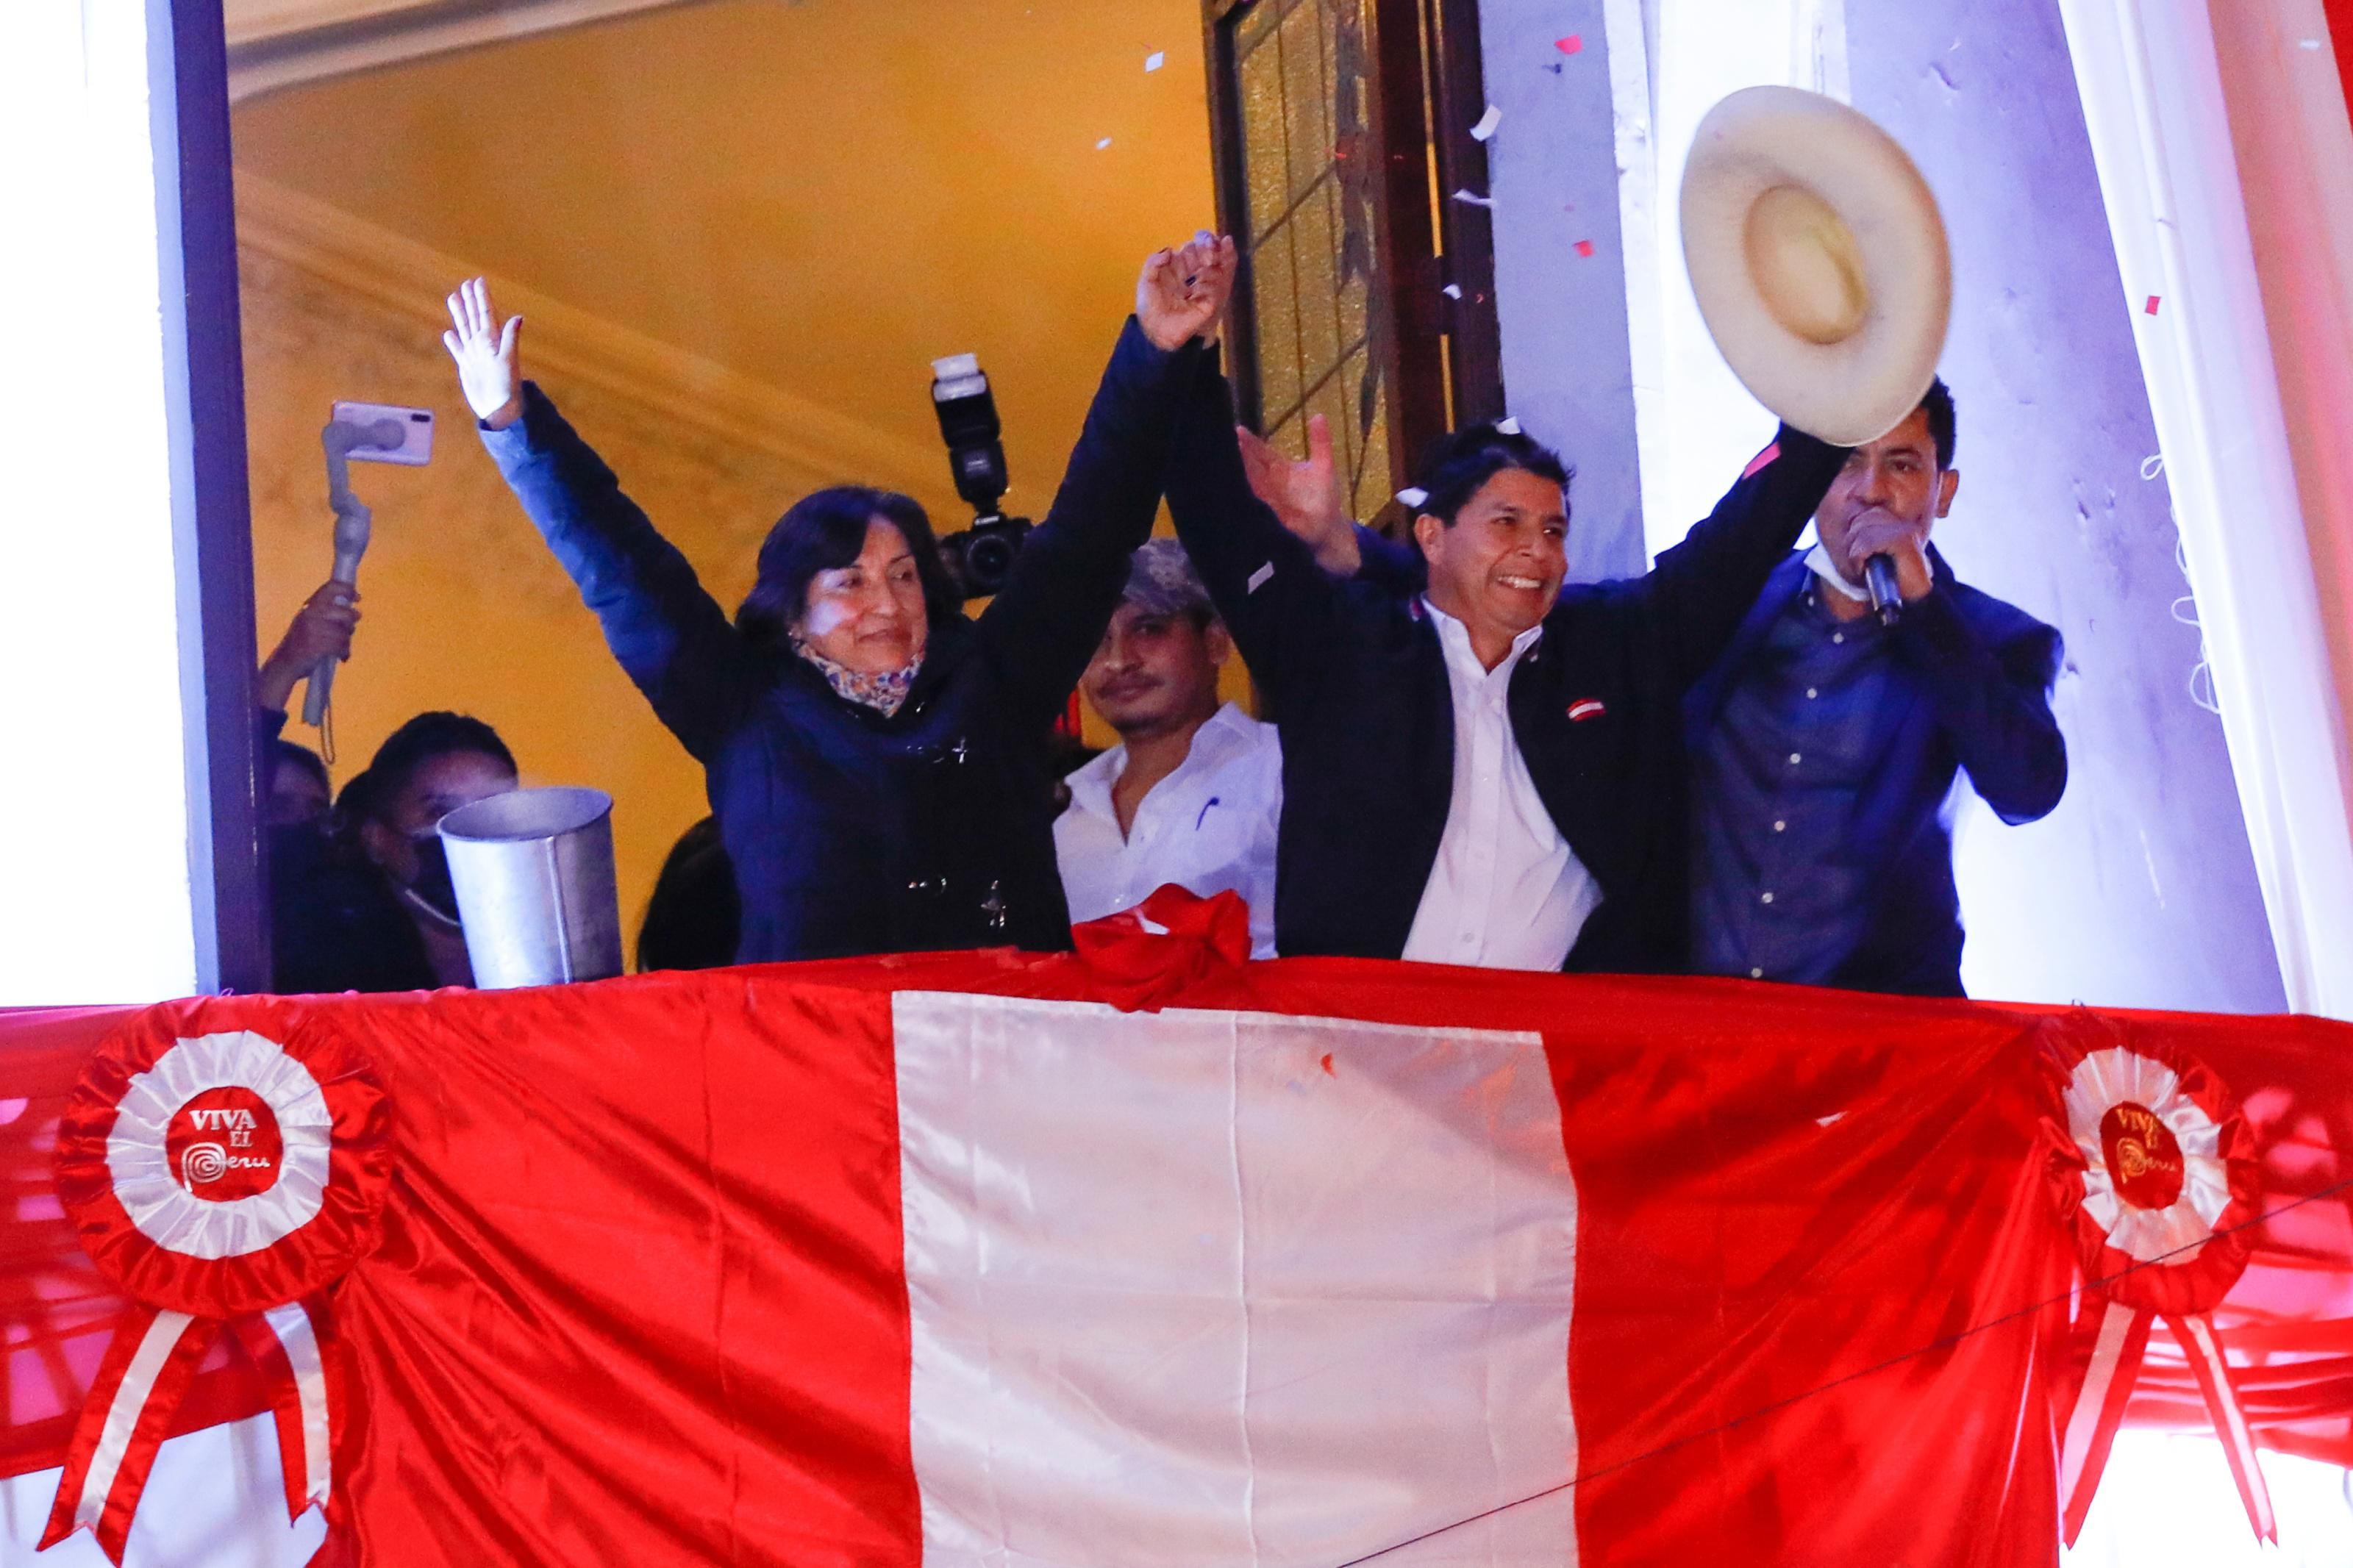 Pedro Castillo, the president-elect of Peru, and his running mate Dina Boluarte, wave to supporters during a celebration following the official announcement of their victory on July 19, 2021 in Lima, Peru. (Photo: Ricardo Moreira via Getty Images)